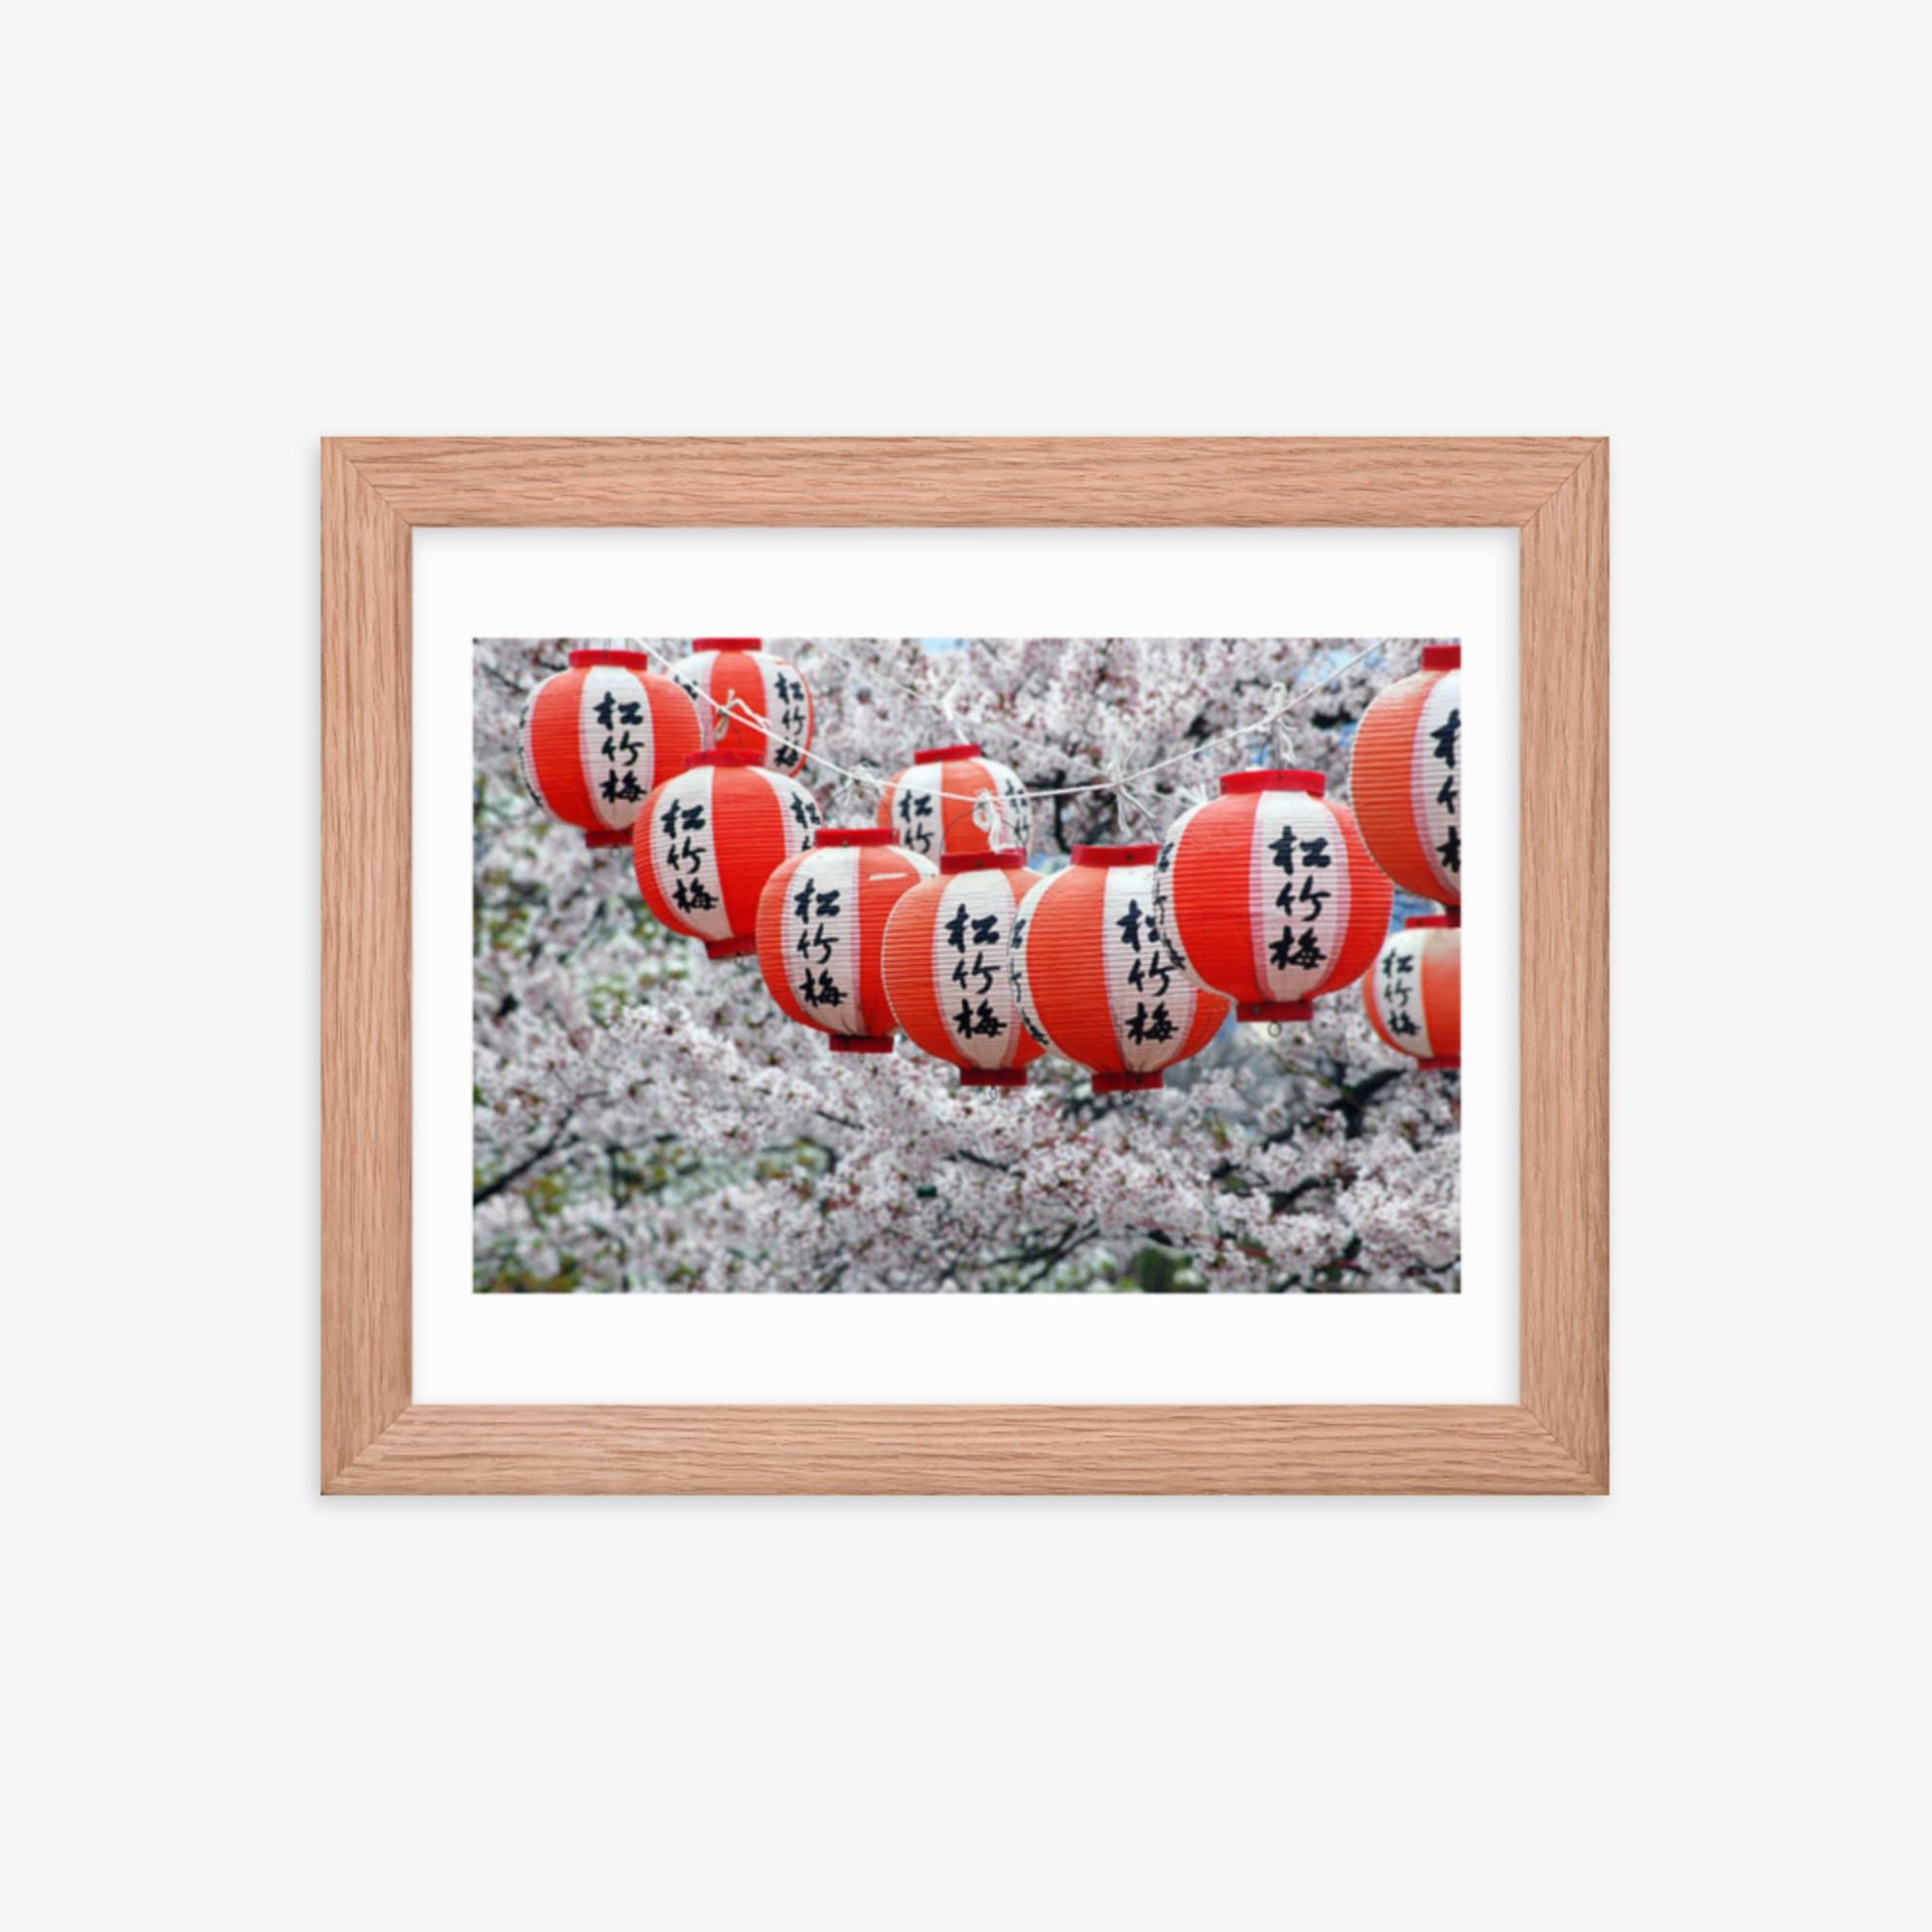 Japanese Lanterns and Cherry Blossom, Kyoto, Japan 8x10 in Poster With Oak Frame